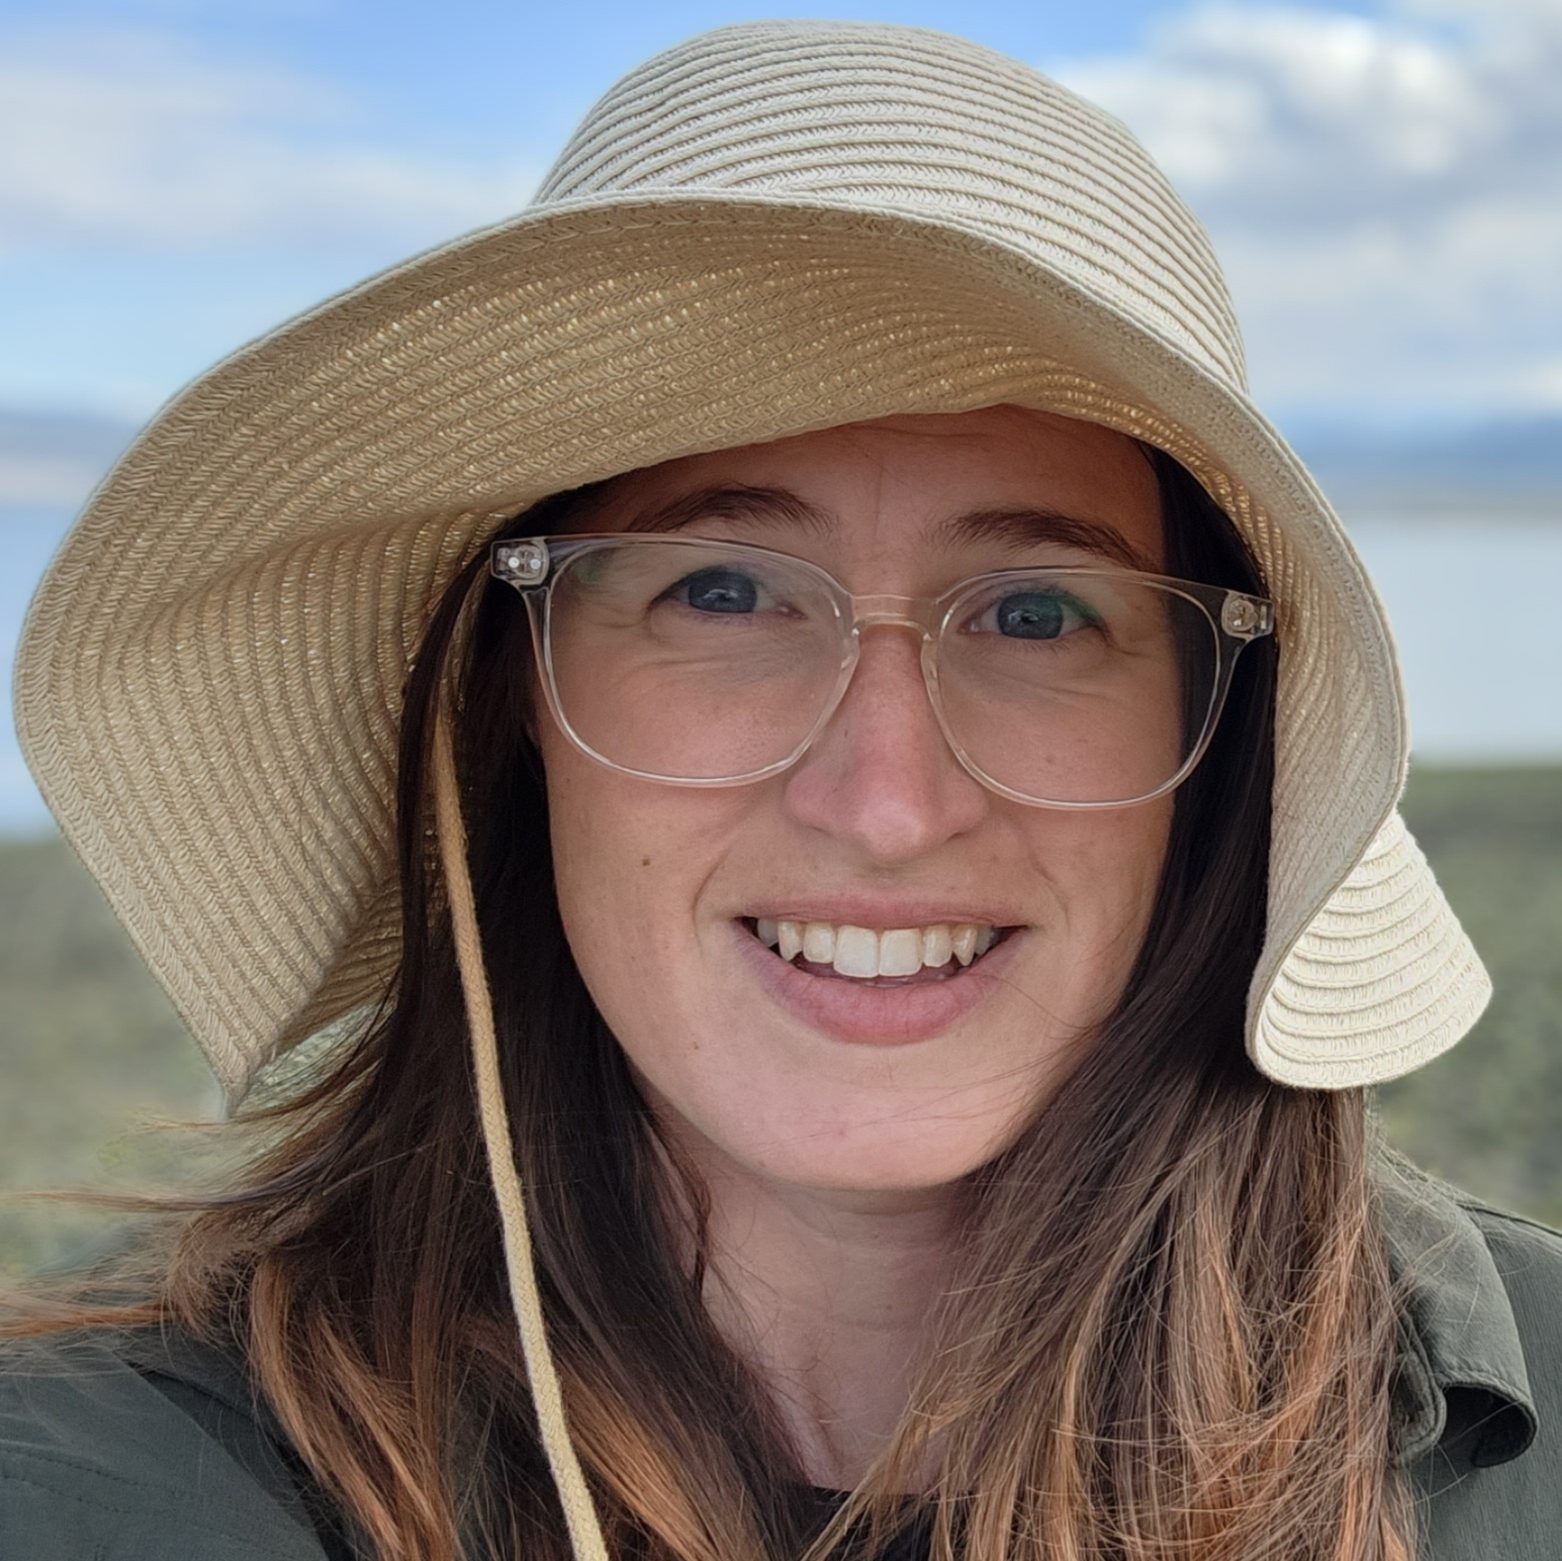 Close-up of a smiling person, wearing a sun hat and eyeglasses, outdoors under a partly cloudy sky.